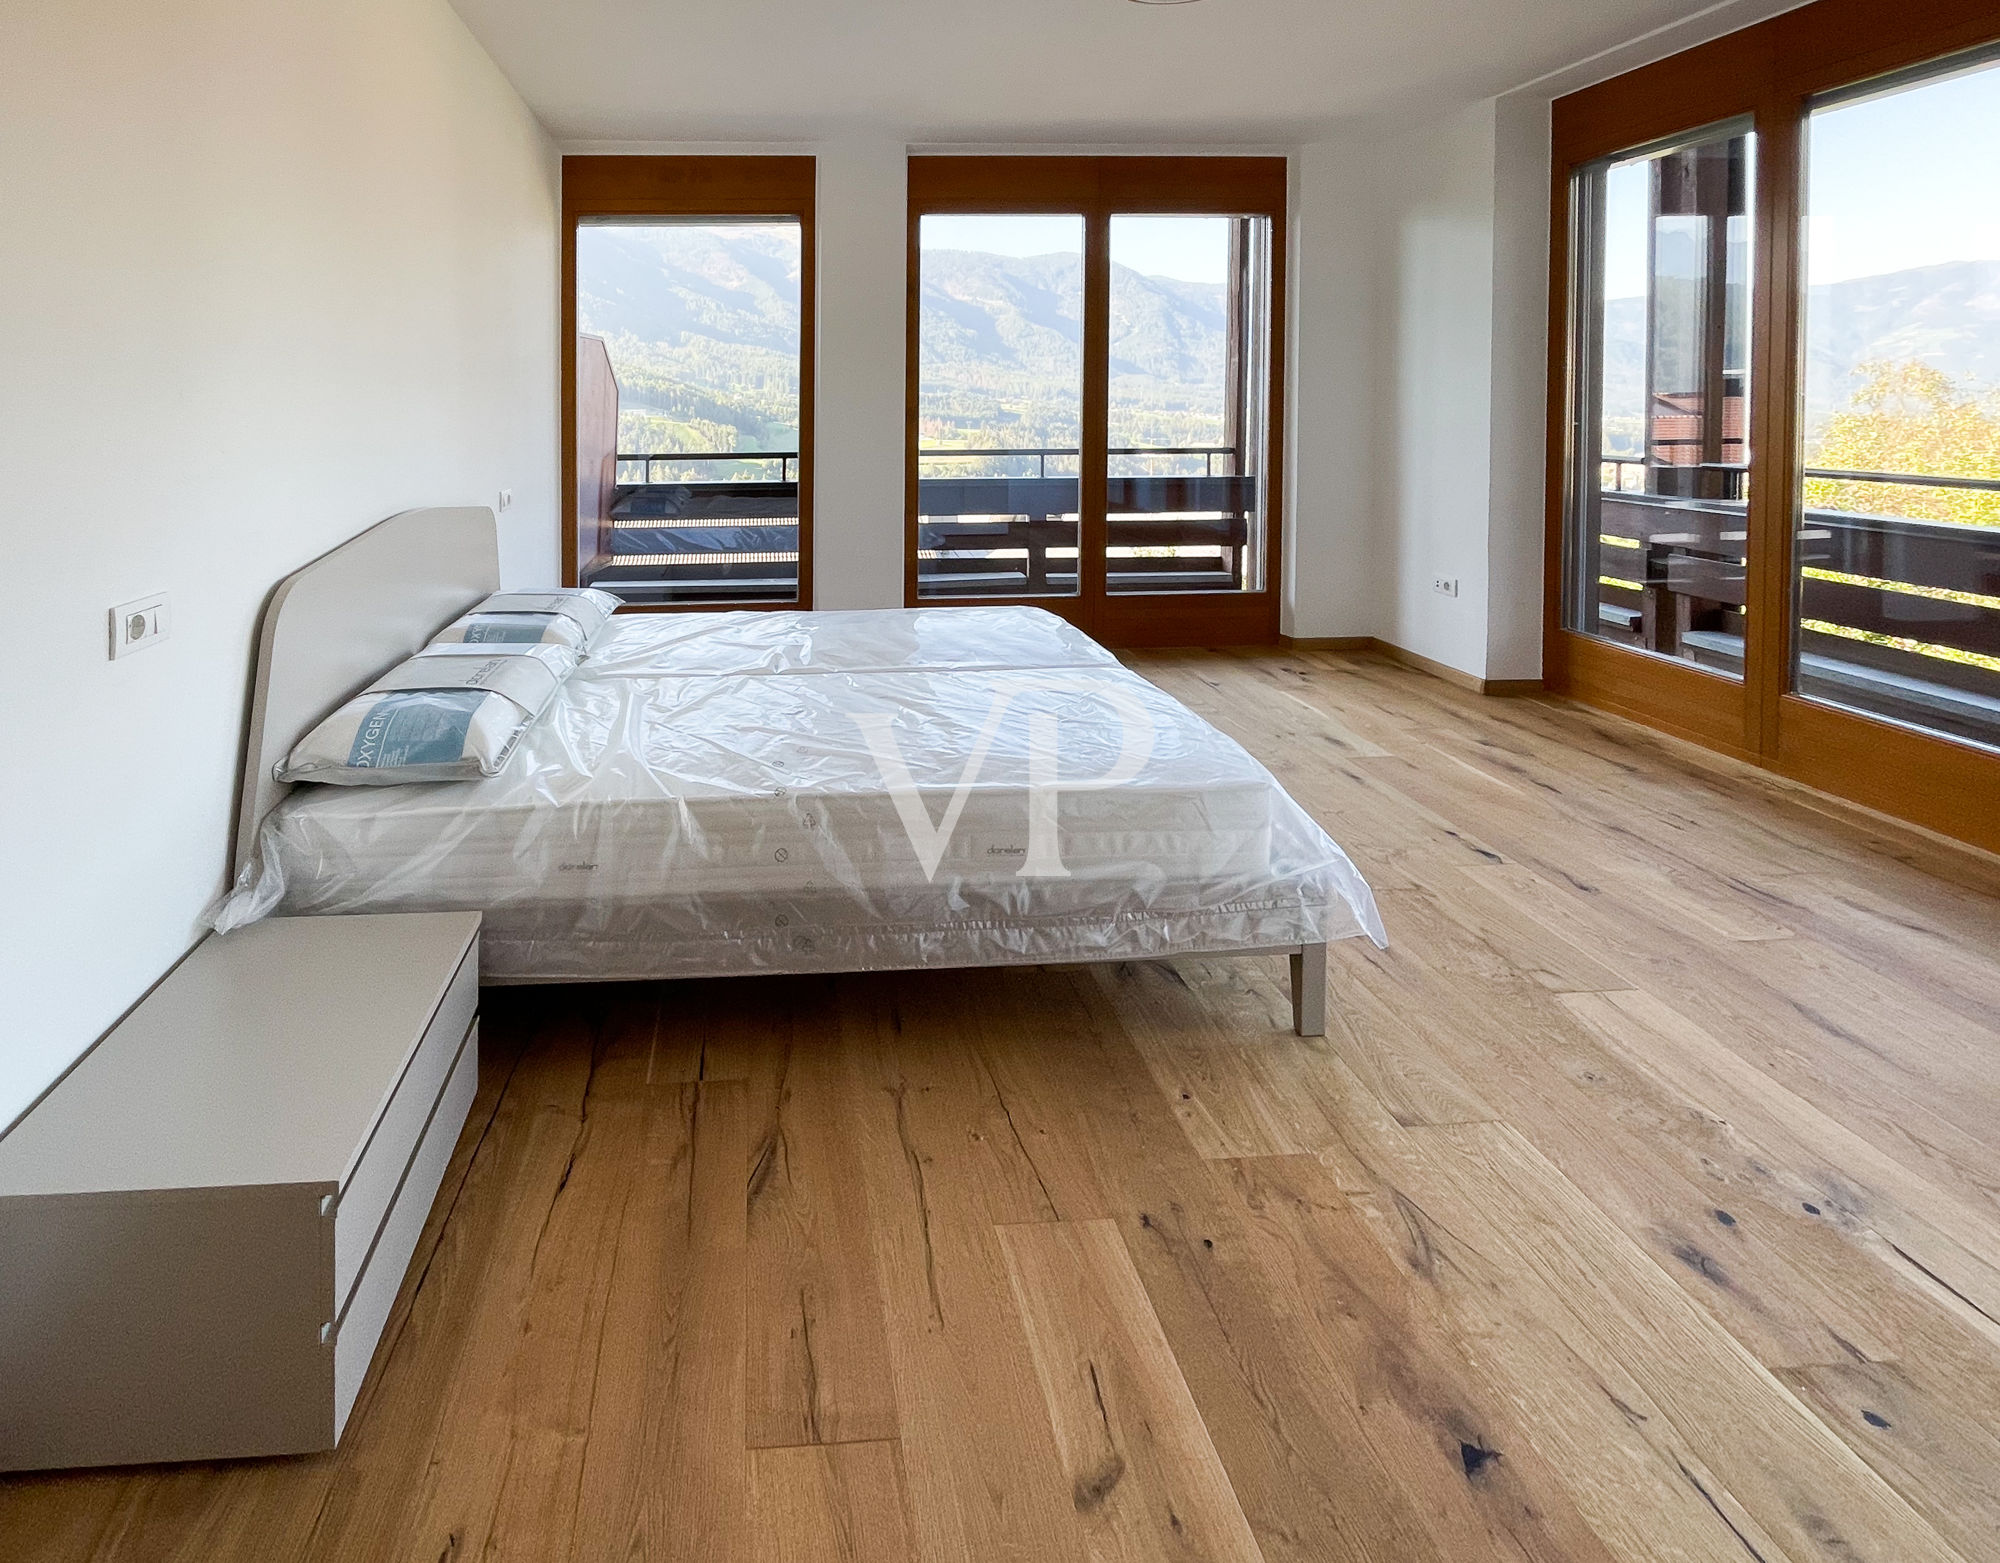 Kronplatz: Freshly renovated and furnished apartment in the beautiful Pustertal Valley.
